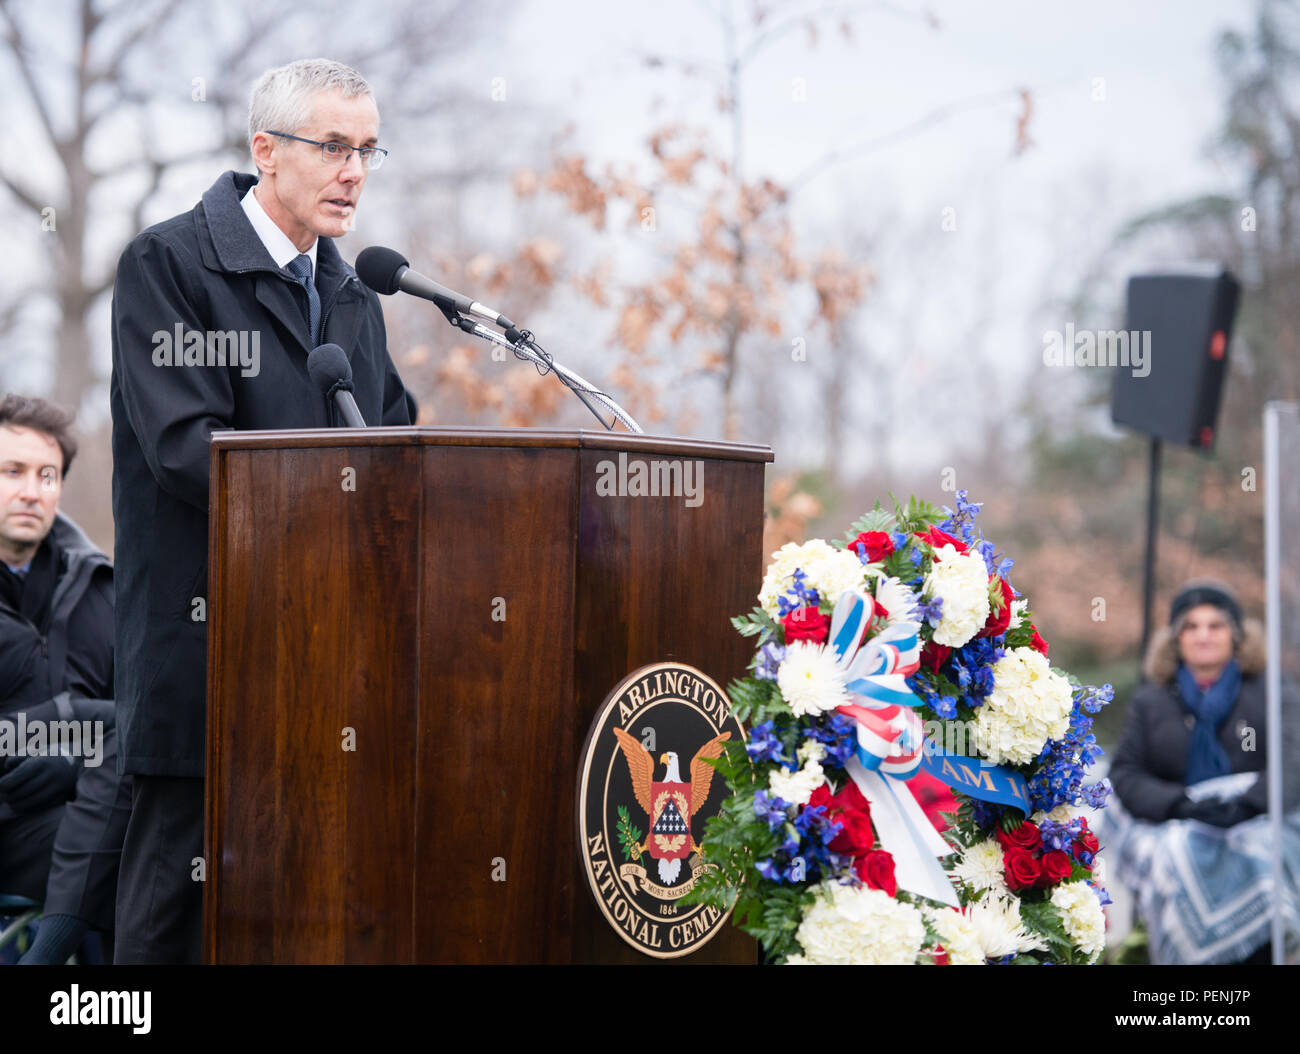 Peter Neffenger, administrator of the Transportation Security Administration, gives remarks during the Pan Am Flight 103 memorial ceremony in Arlington National Cemetery, Dec. 21, 2015, in Arlington, Va. A terrorist’s bomb destroyed the aircraft 27 years ago, in what became known as the “Lockerbie bombing,” killing 243 passengers, 16 crew members and 11 people on the ground. (U.S. Army photo by Rachel Larue/Arlington National Cemetery/released) Stock Photo